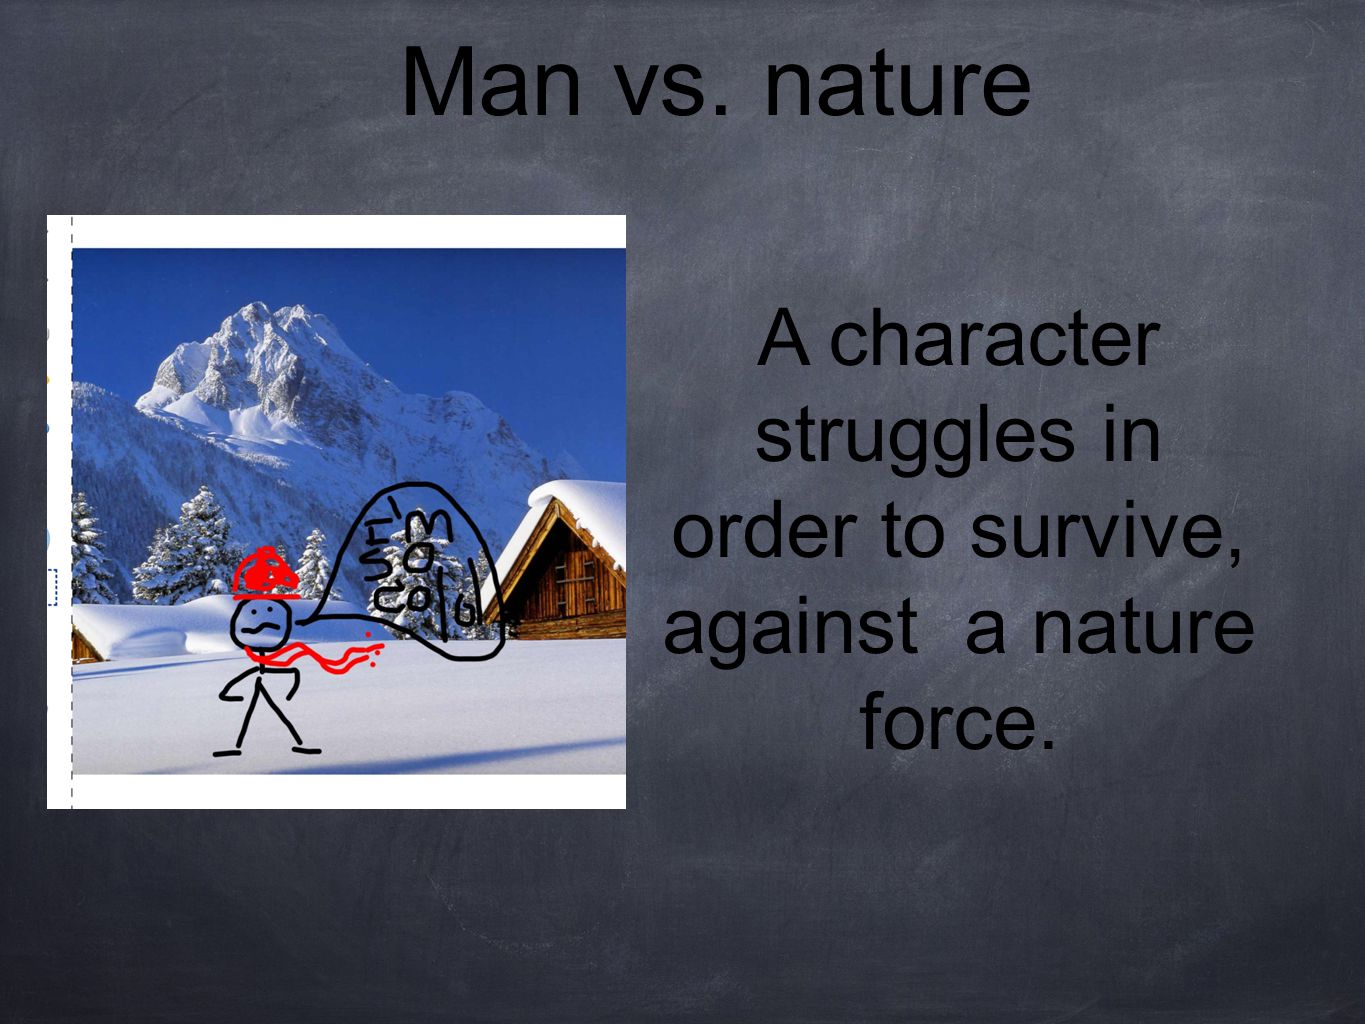 Man vs. nature A character struggles in order to survive, against a nature force.